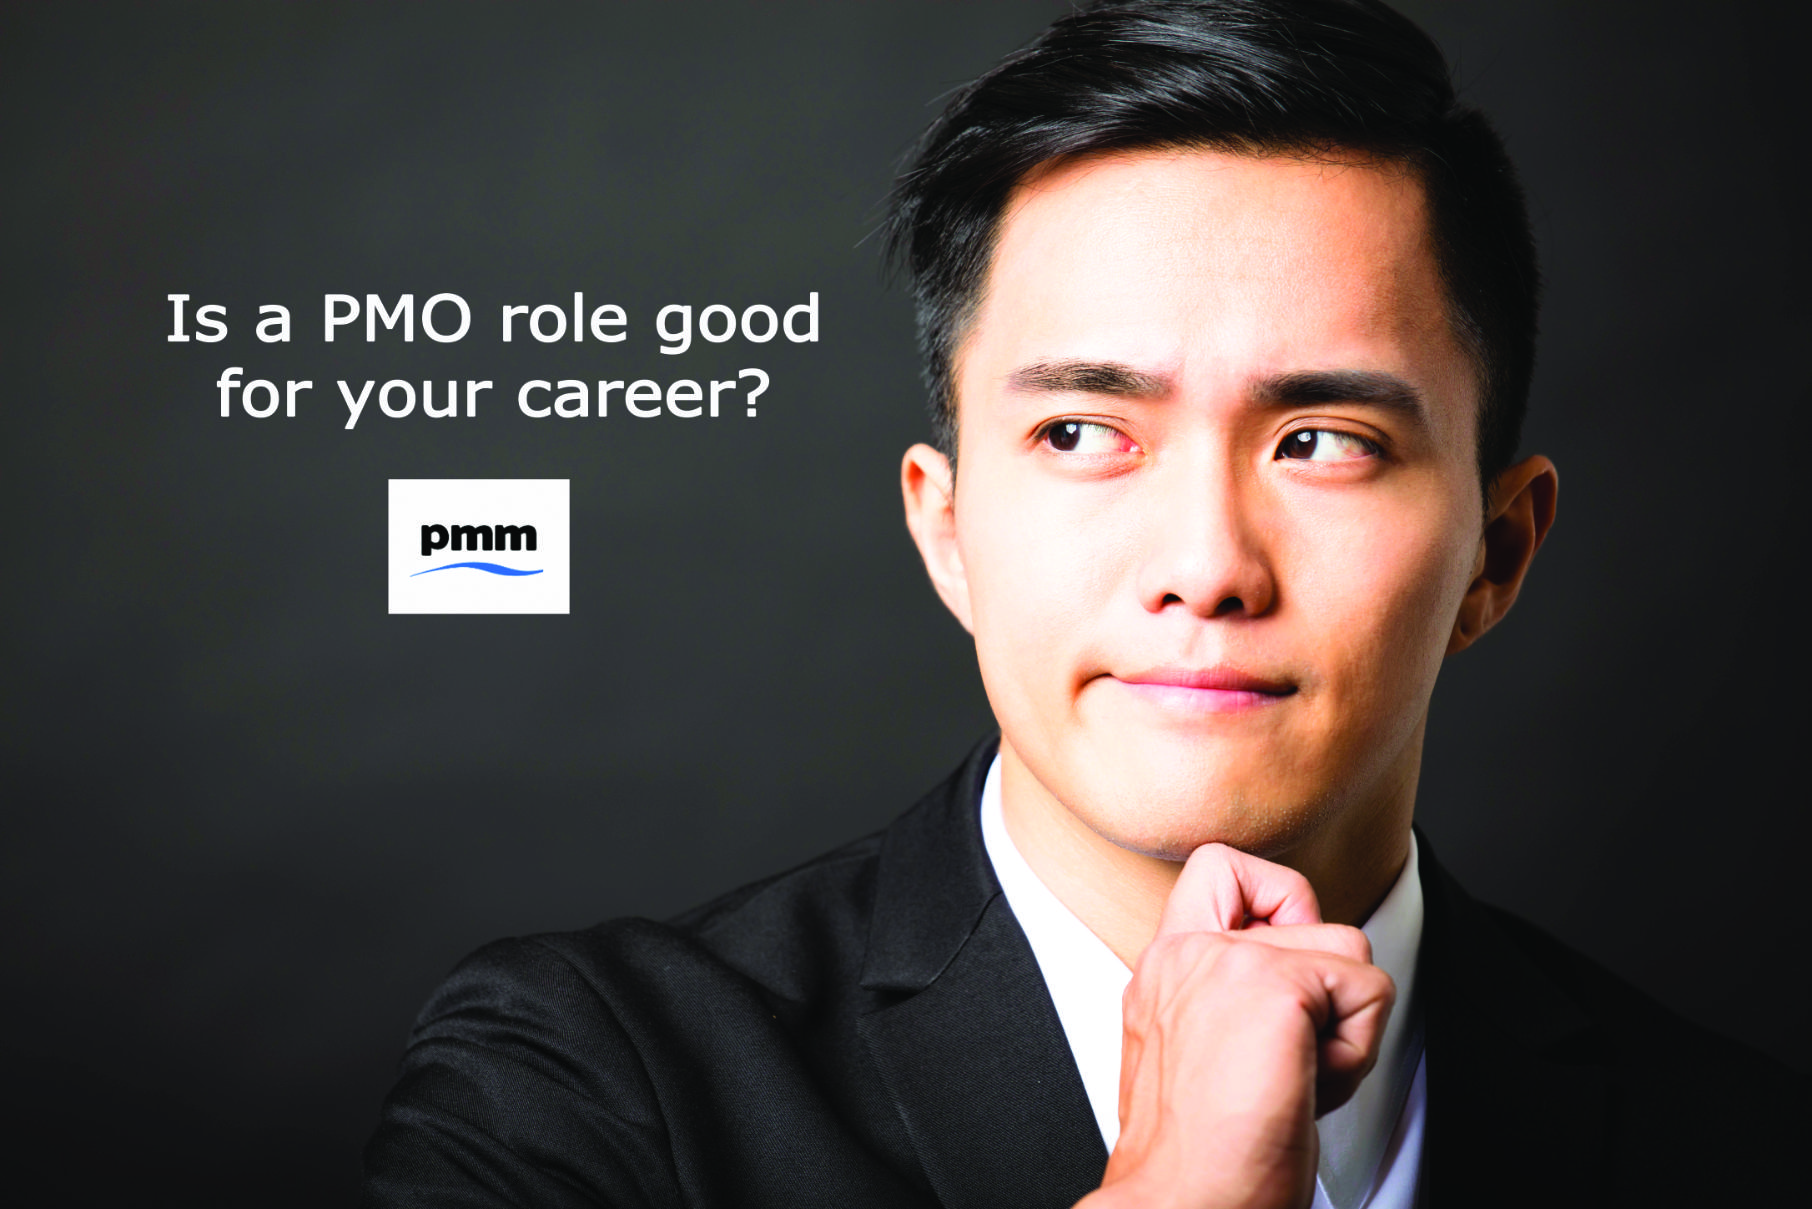 Is a PMO role good for your career